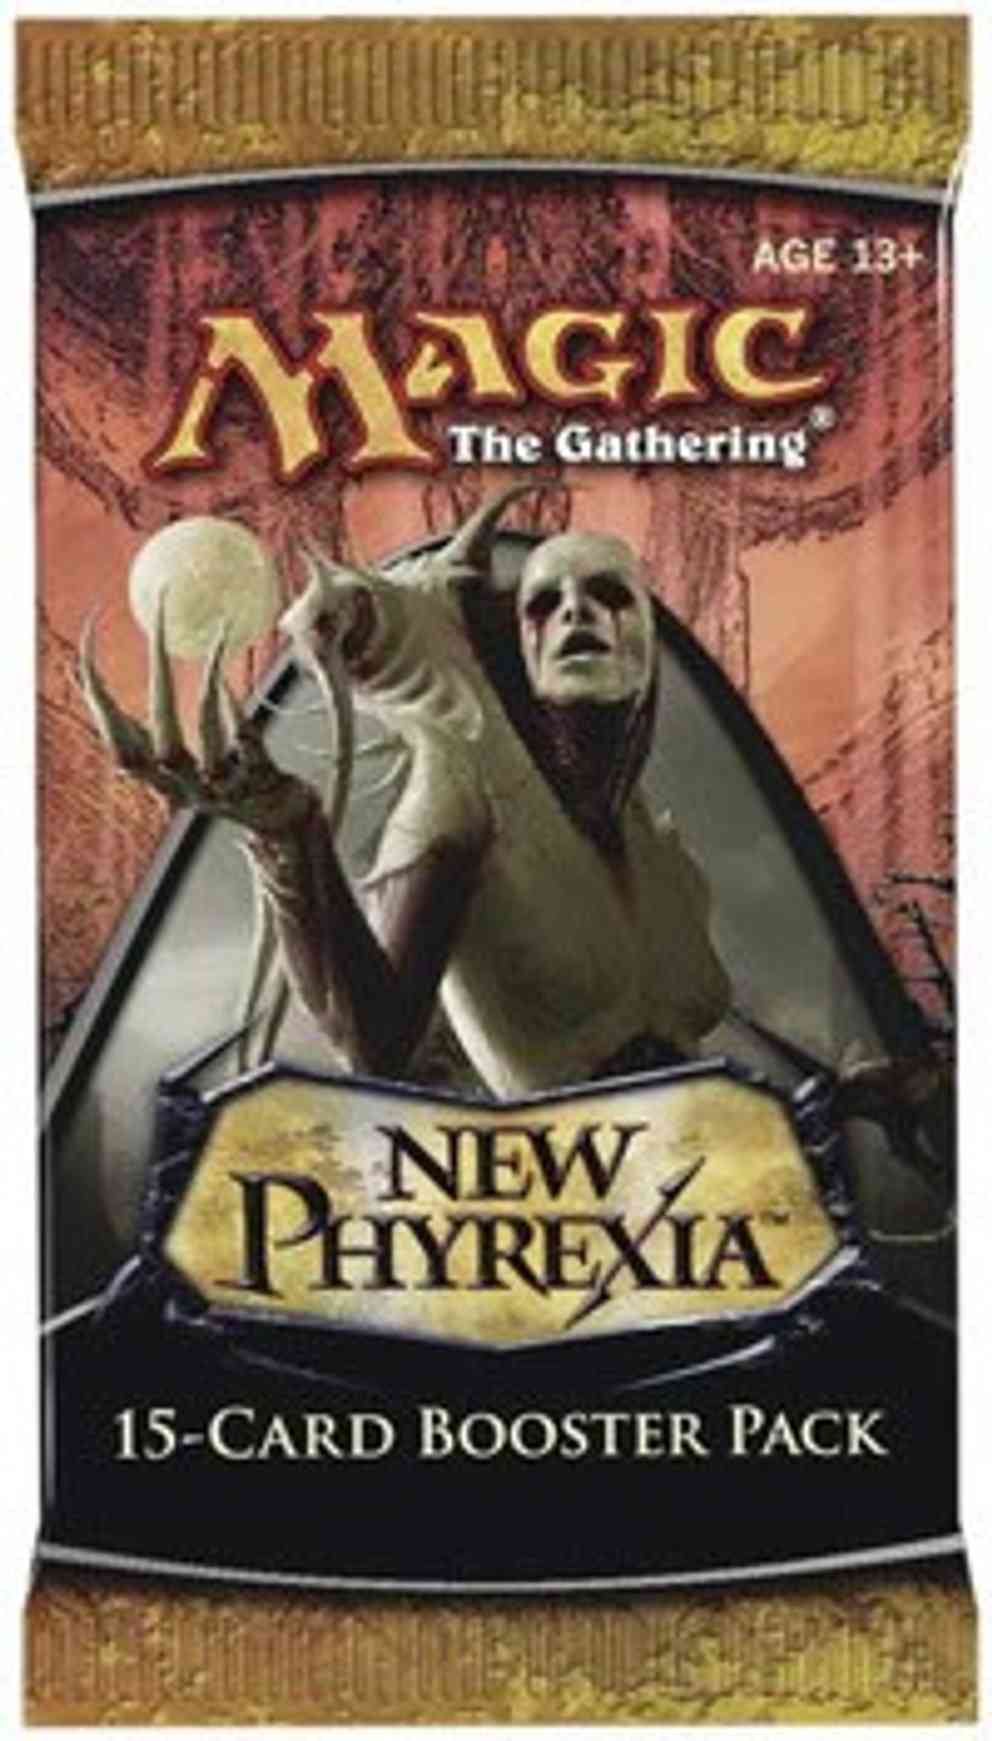 New Phyrexia - Booster Pack magic card front